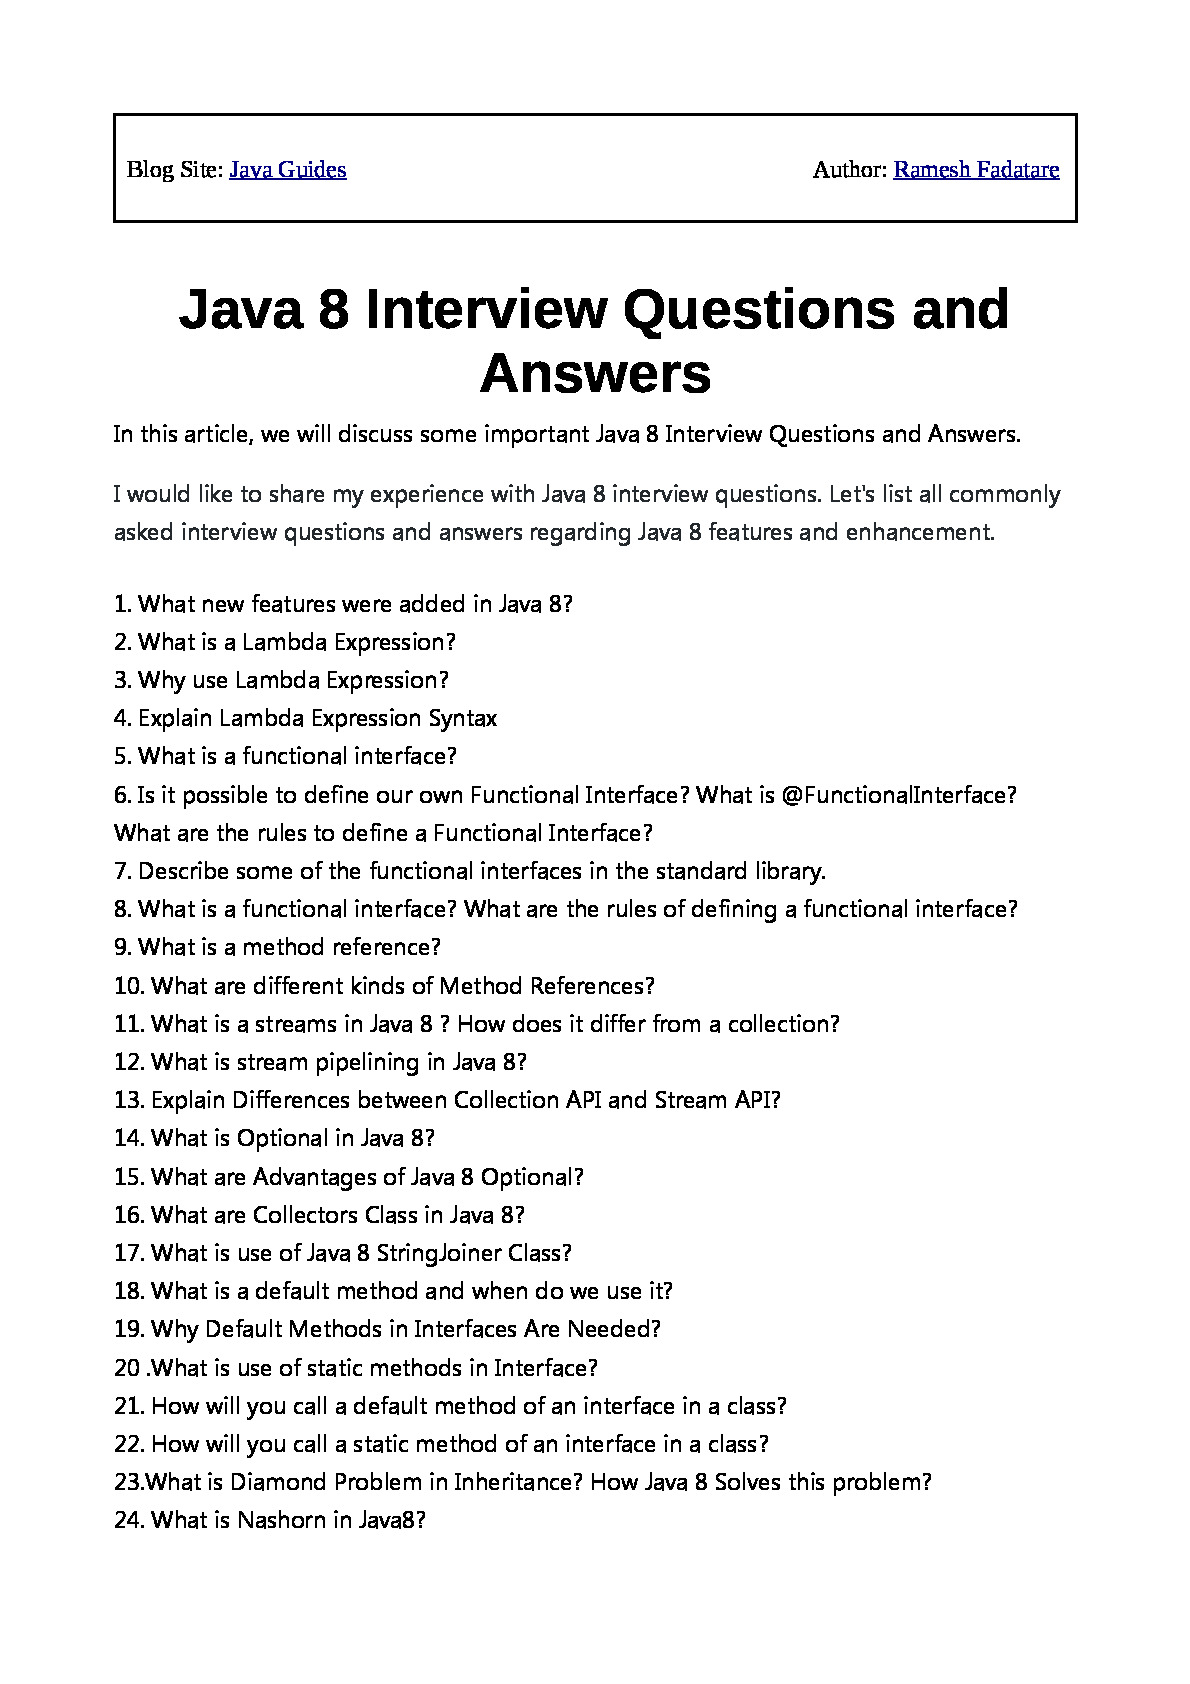 Java 8 Interview Questions and Answers